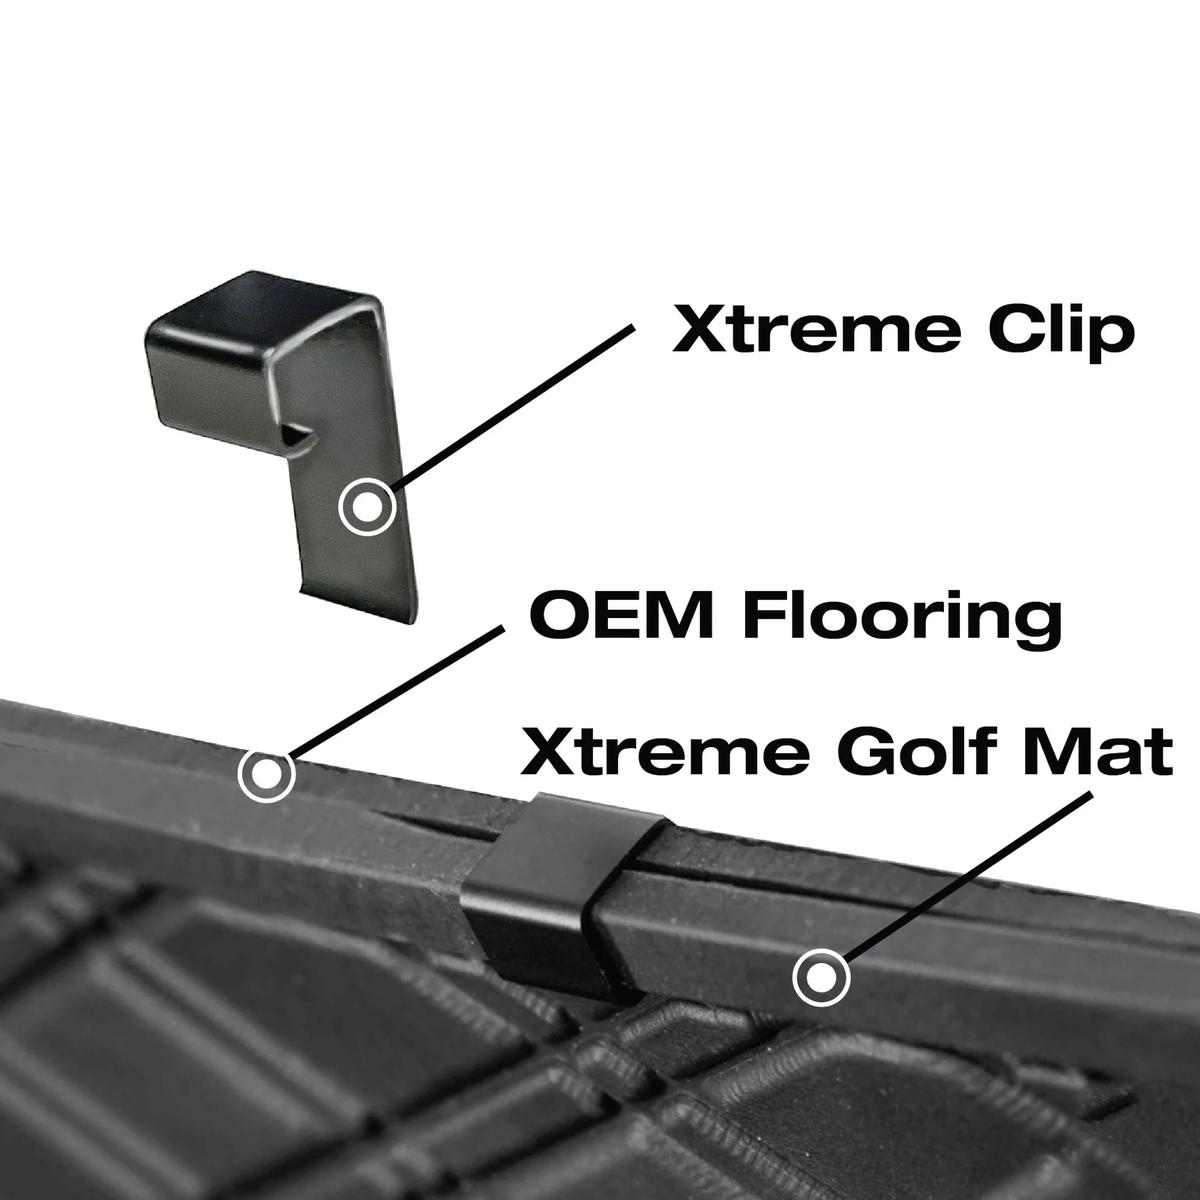 Xtreme Floor Mats for ICON / Advanced EV1 - Black/Red